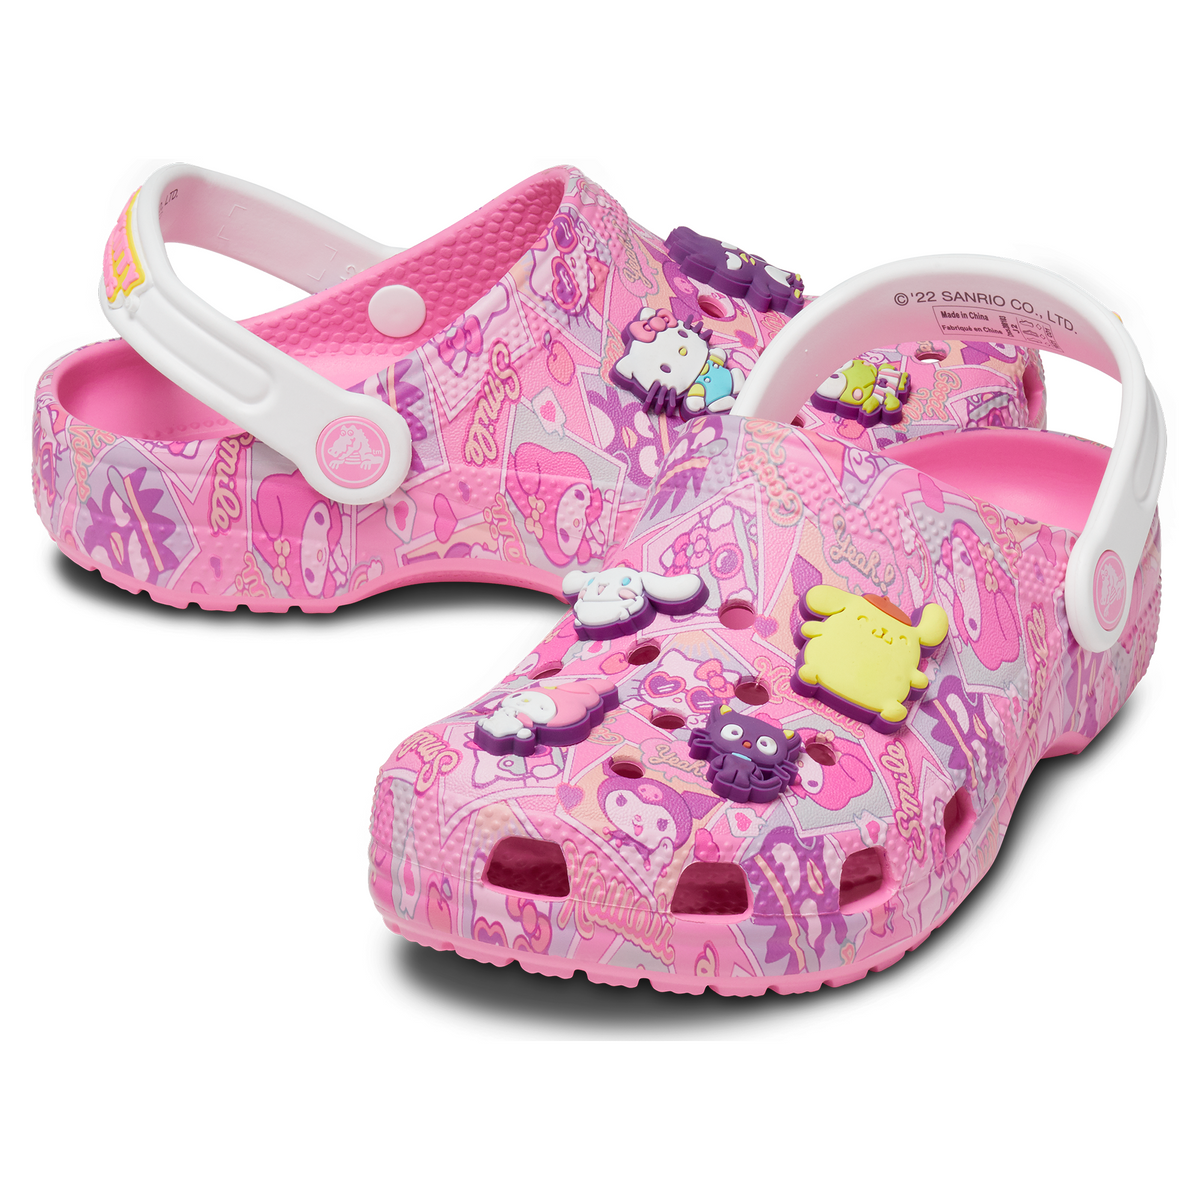 Hello Kitty and Friends x Crocs Adult Classic Clog